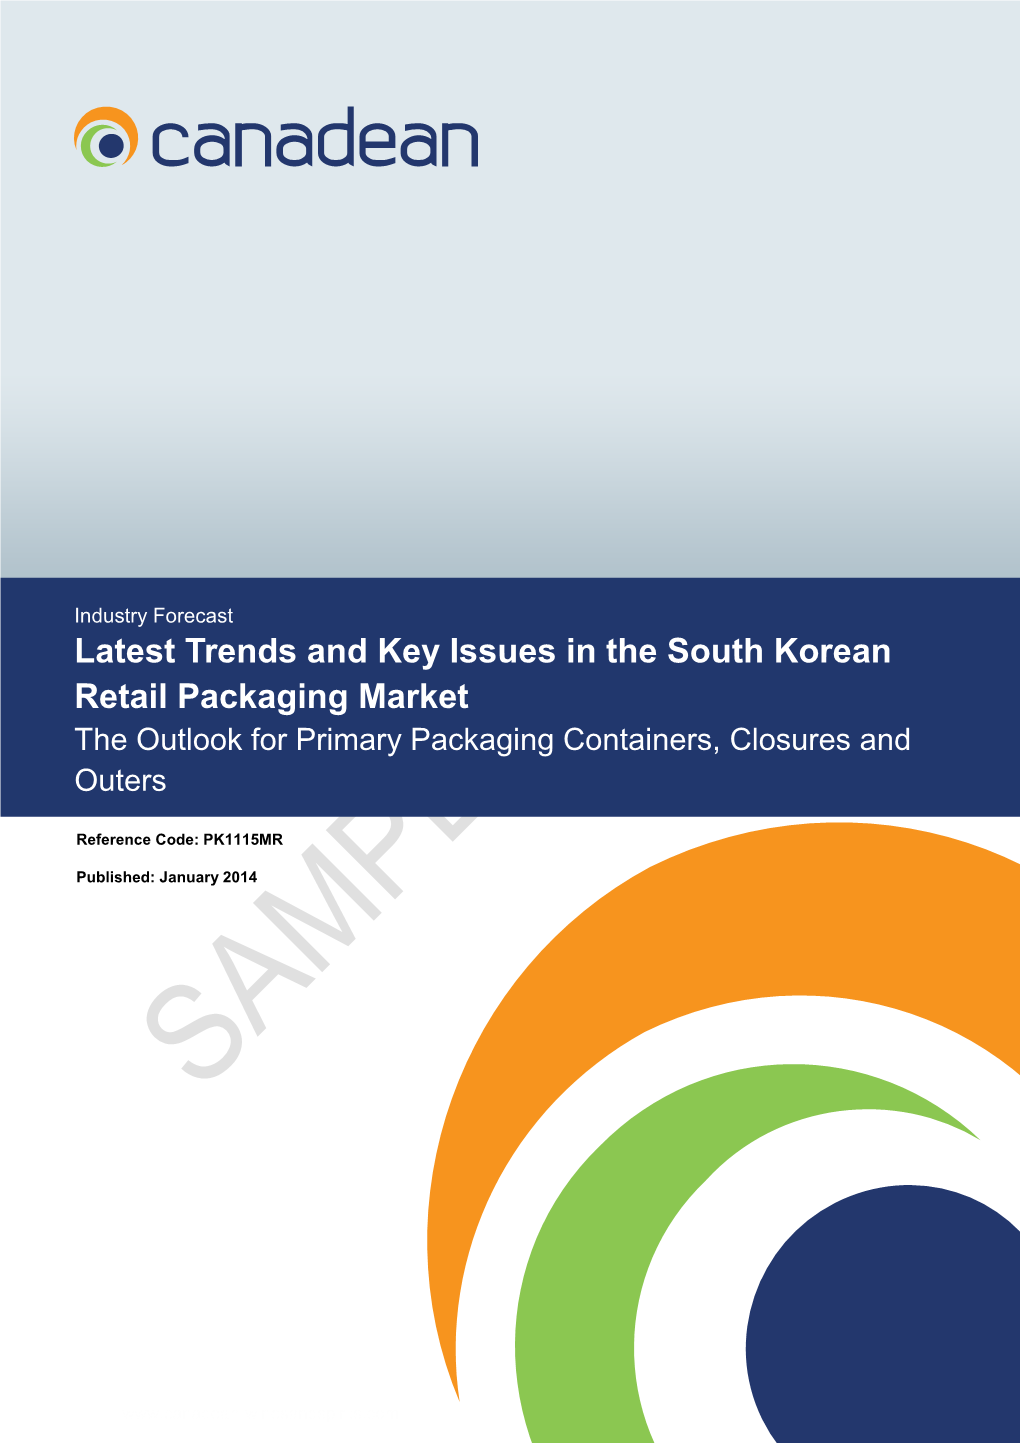 Latest Trends and Key Issues in the South Korean Retail Packaging Market the Outlook for Primary Packaging Containers, Closures and Outers